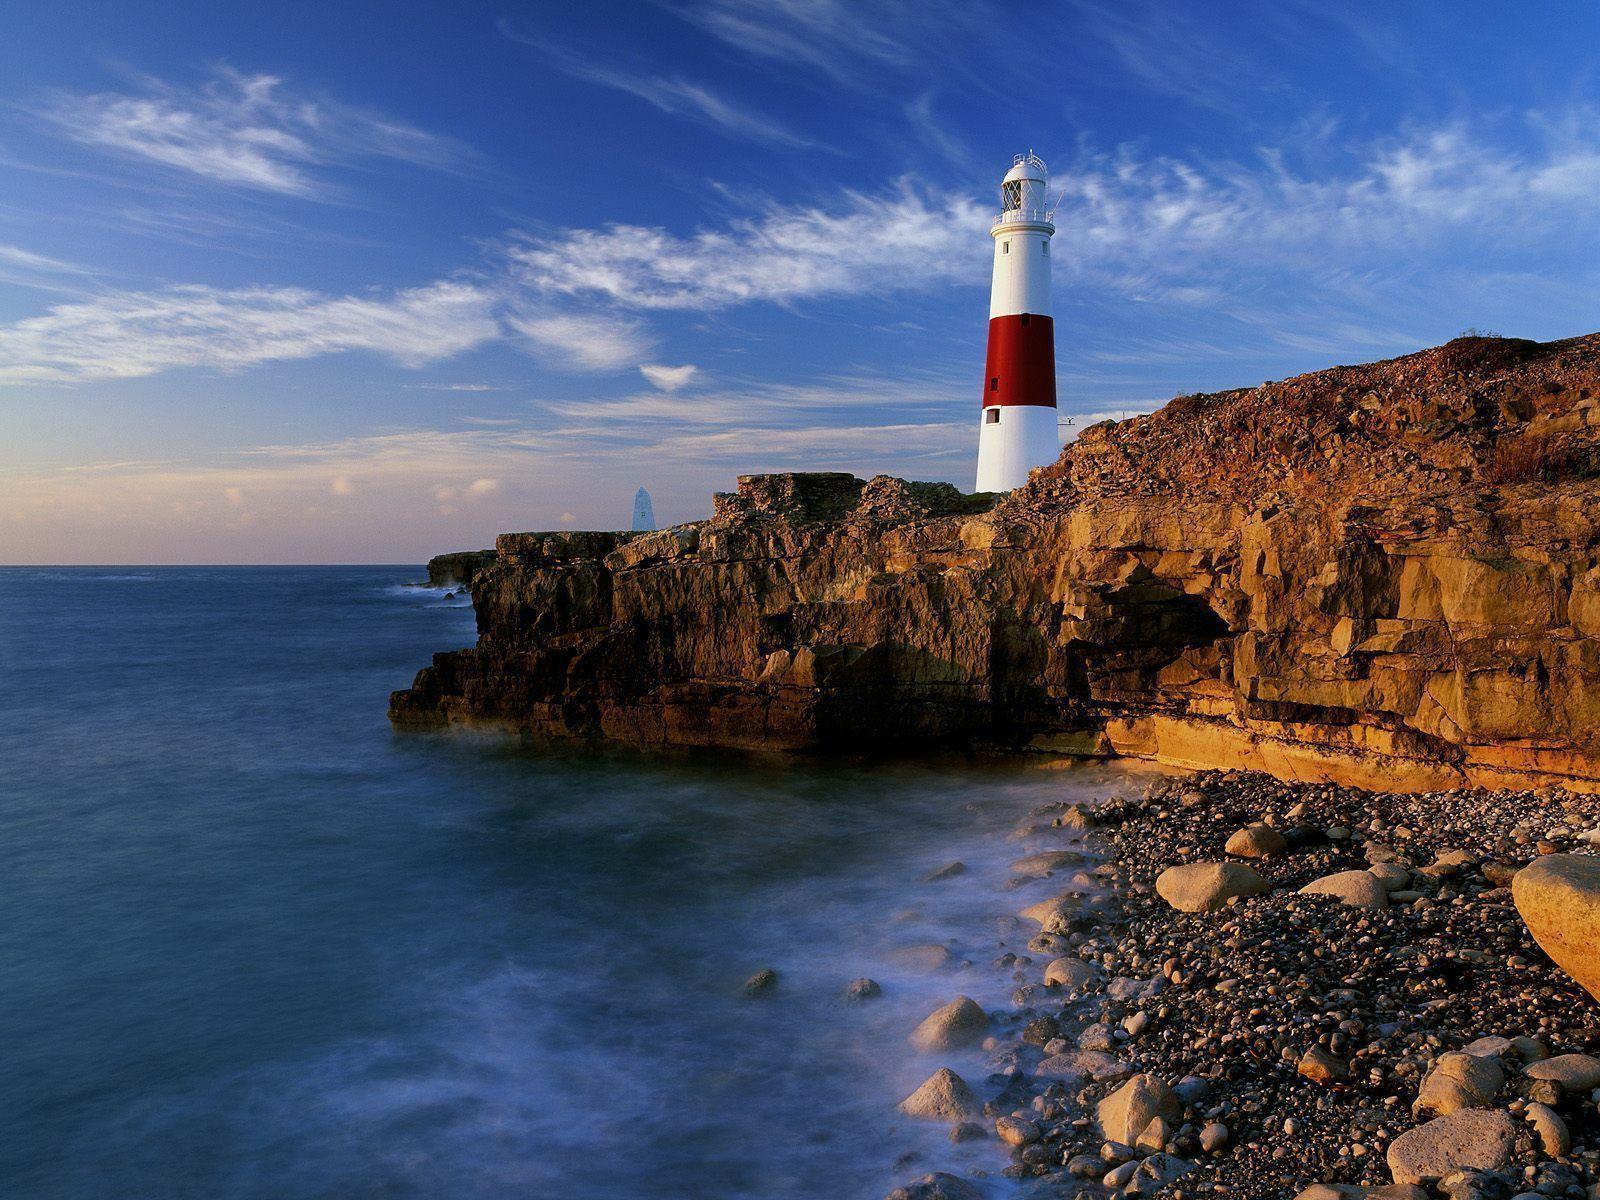 Wallpaper Tagged With LIGHTHOUSE. LIGHTHOUSE HD Wallpaper